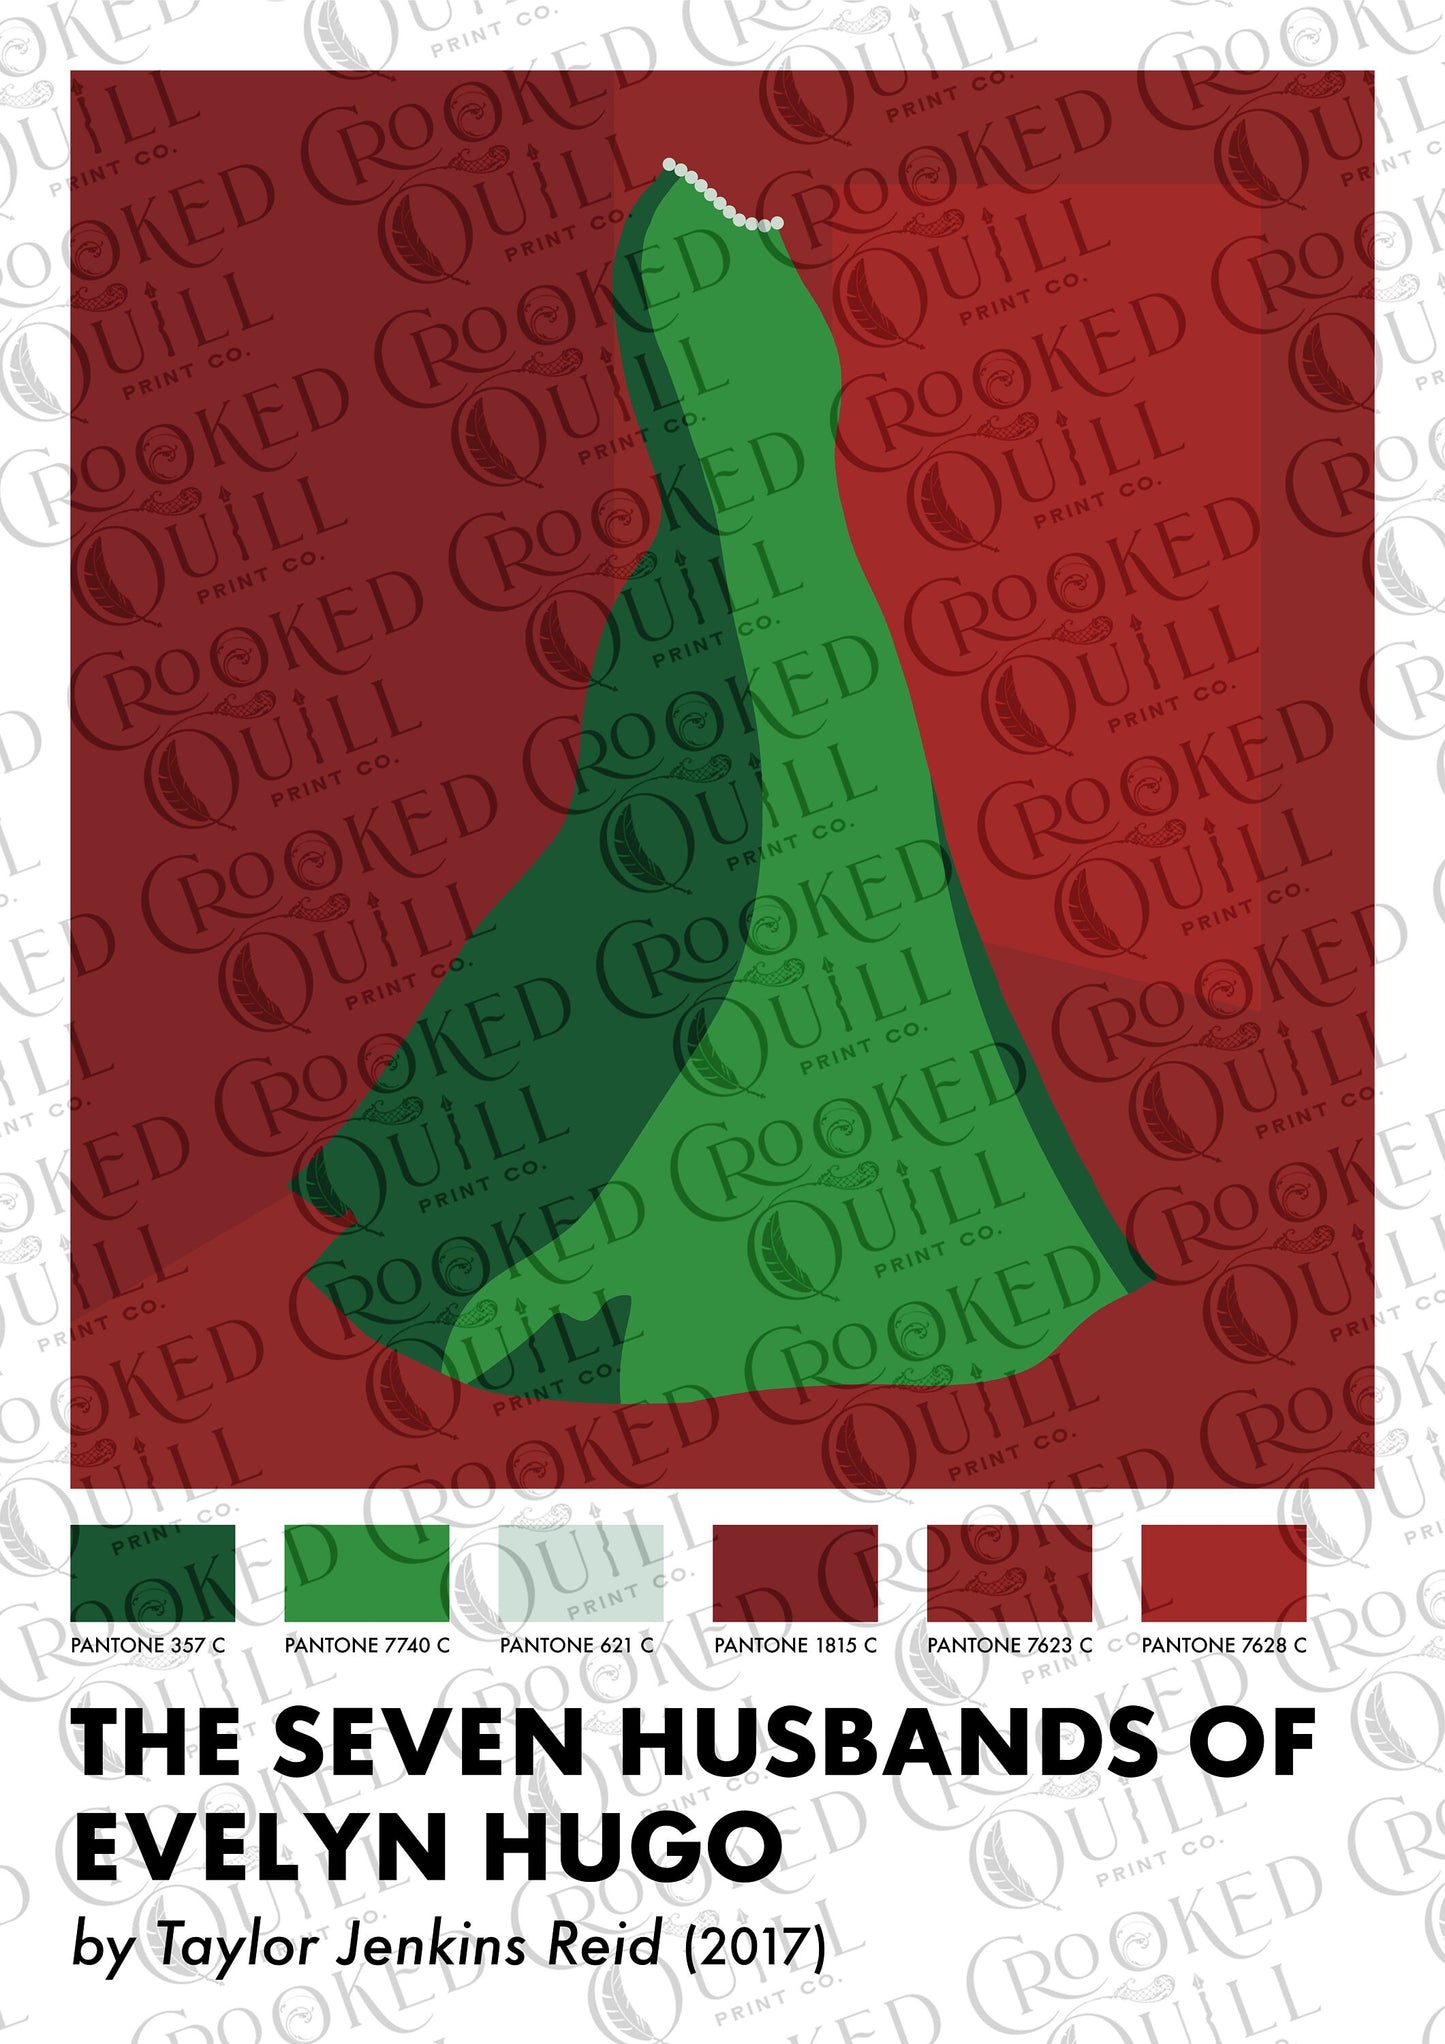 The Seven Husbands of Evelyn Hugo Inspired Art Print - The Pantone Collection